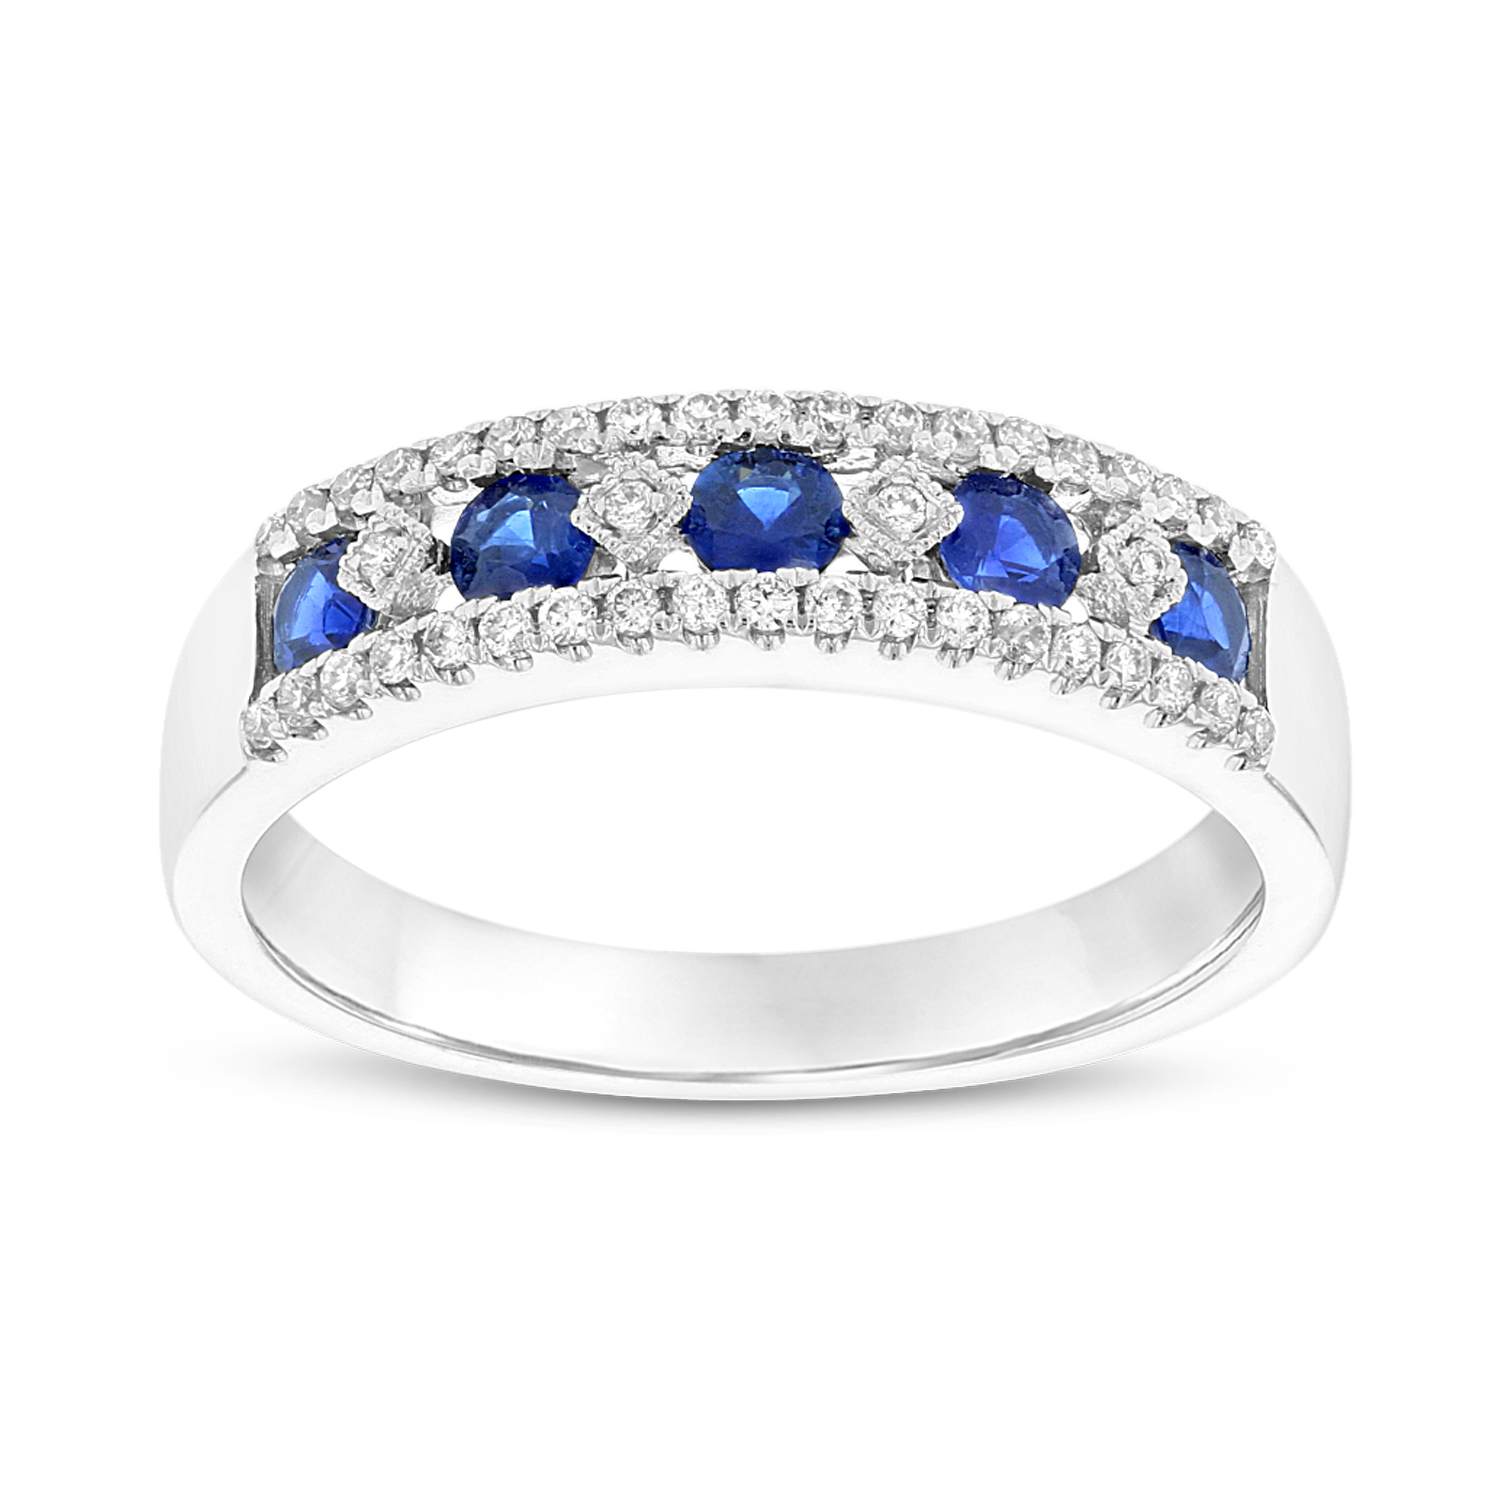 0.66cttw Sapphire and Diamond Fashion Wedding Band in 14k White Gold